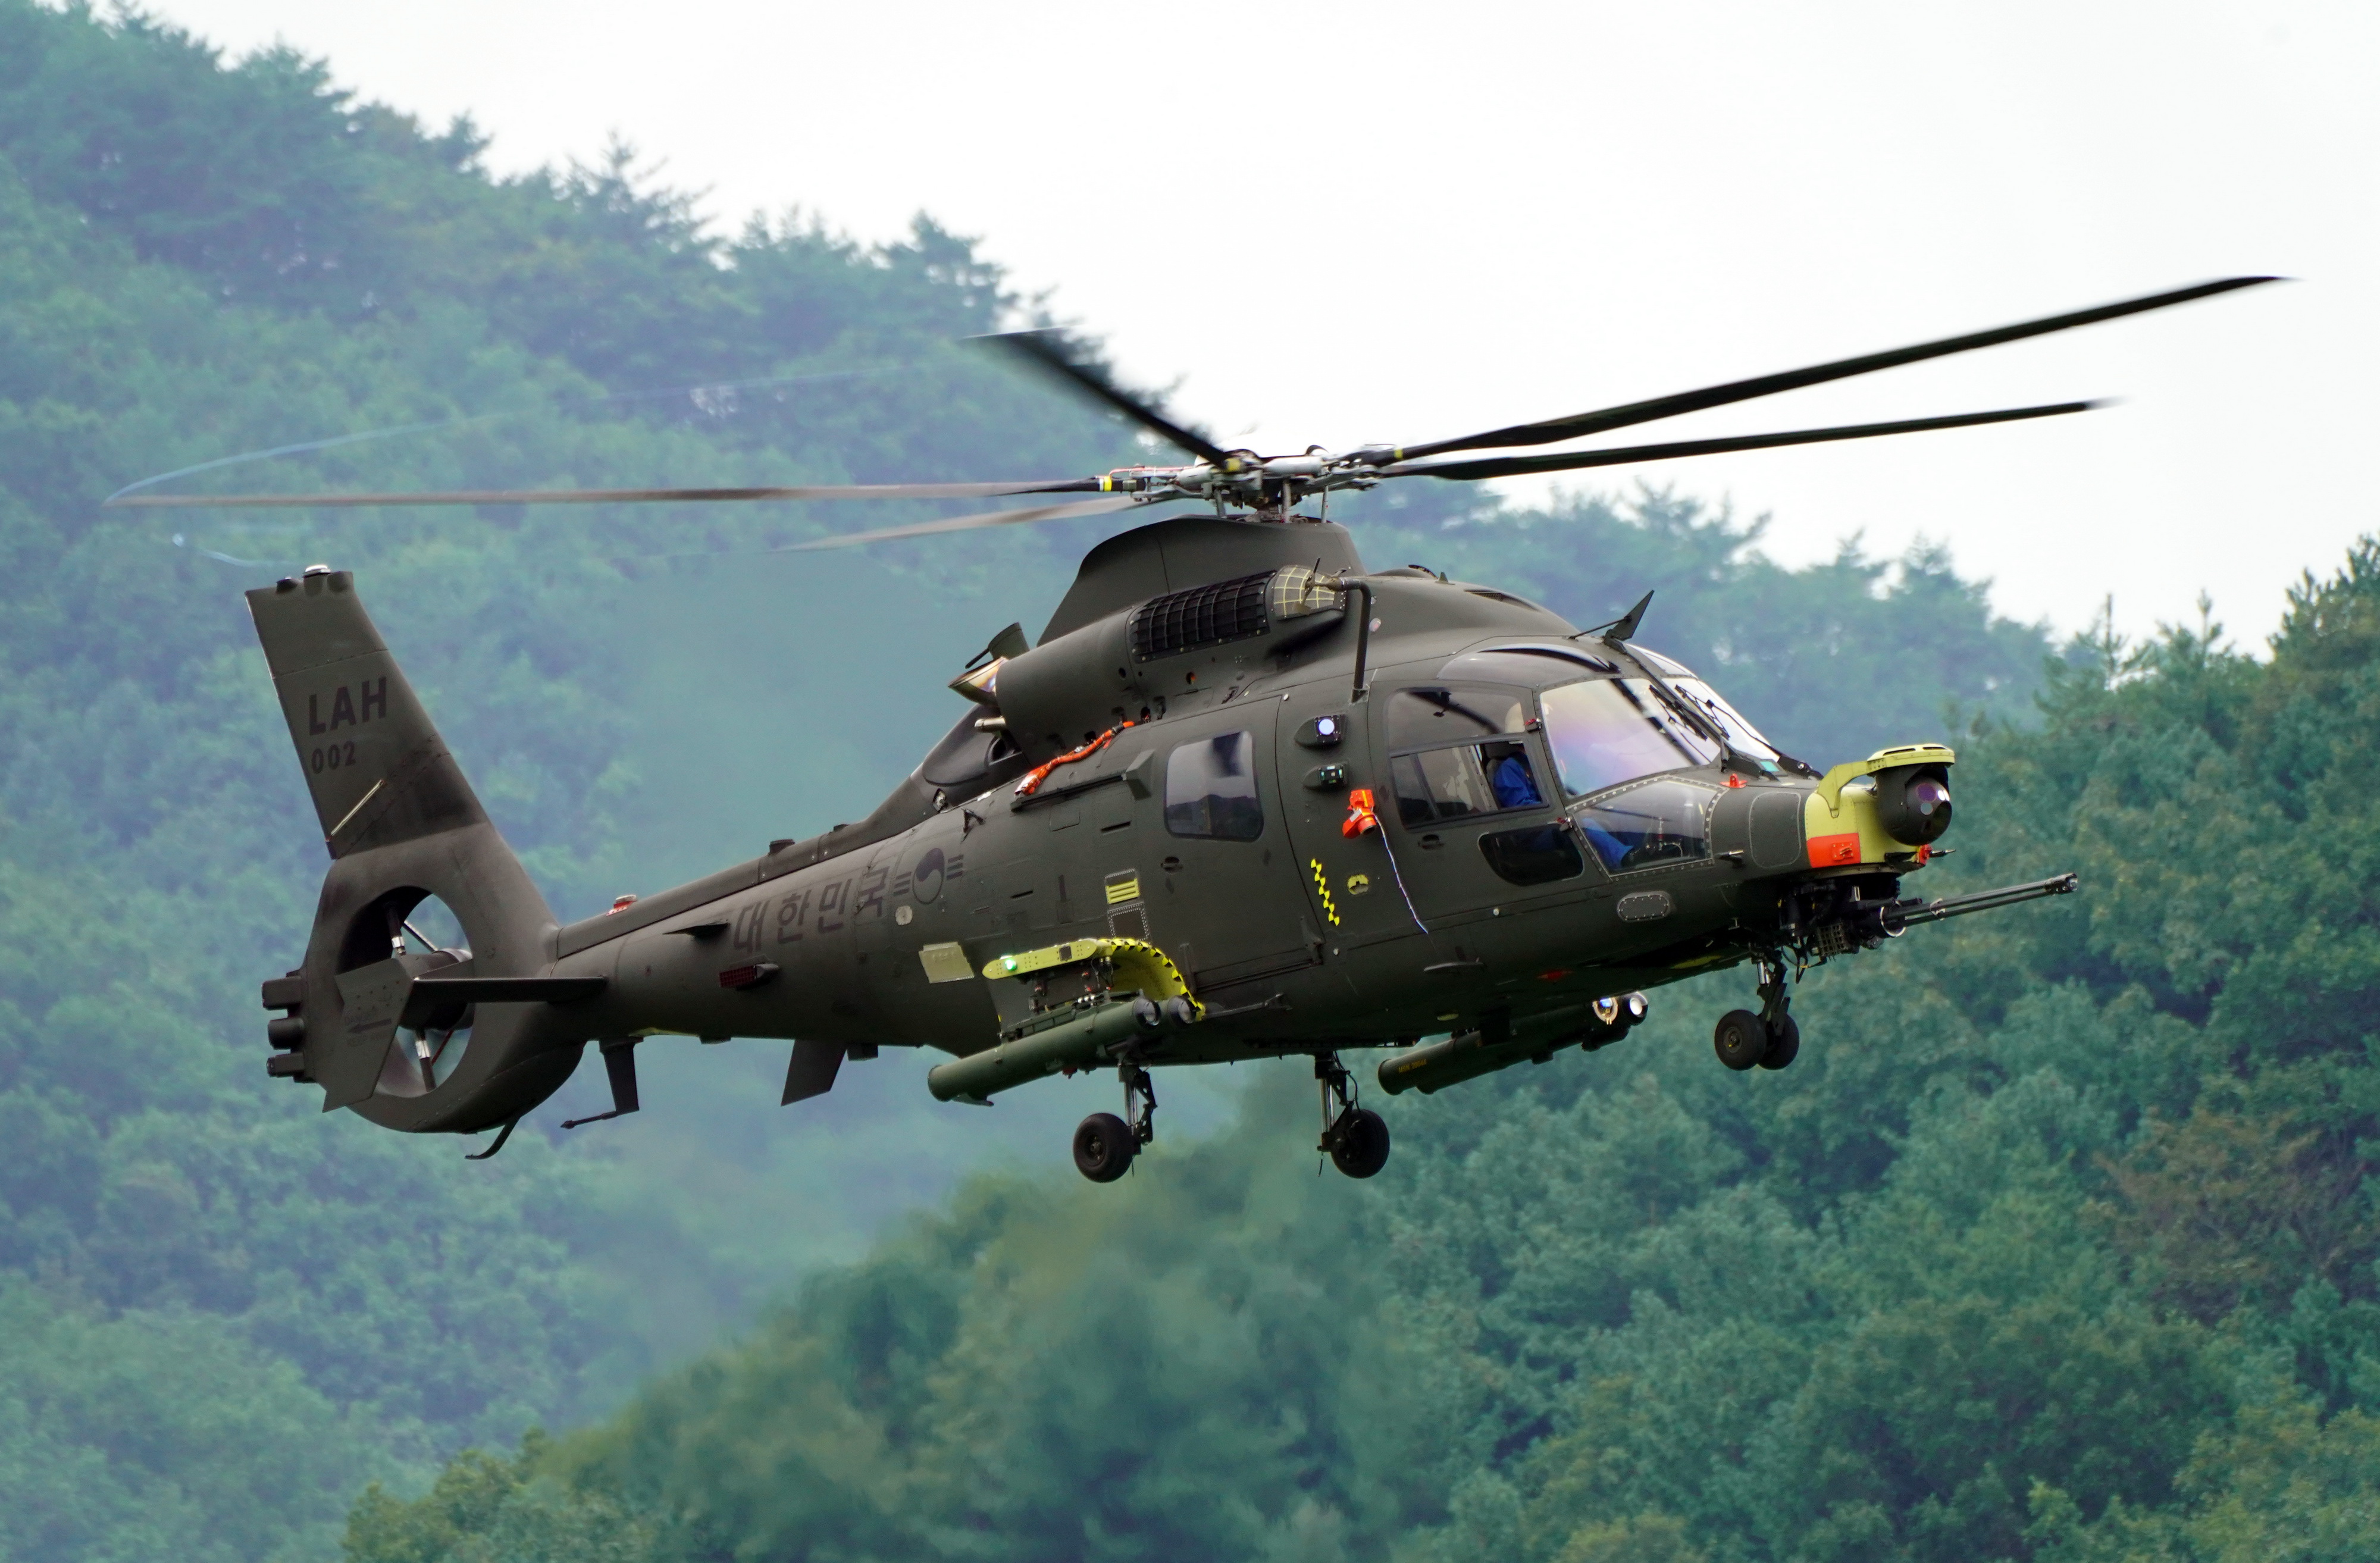 South Korea buys 10 KAI LAH light attack helicopters, contract worth $235,000,000